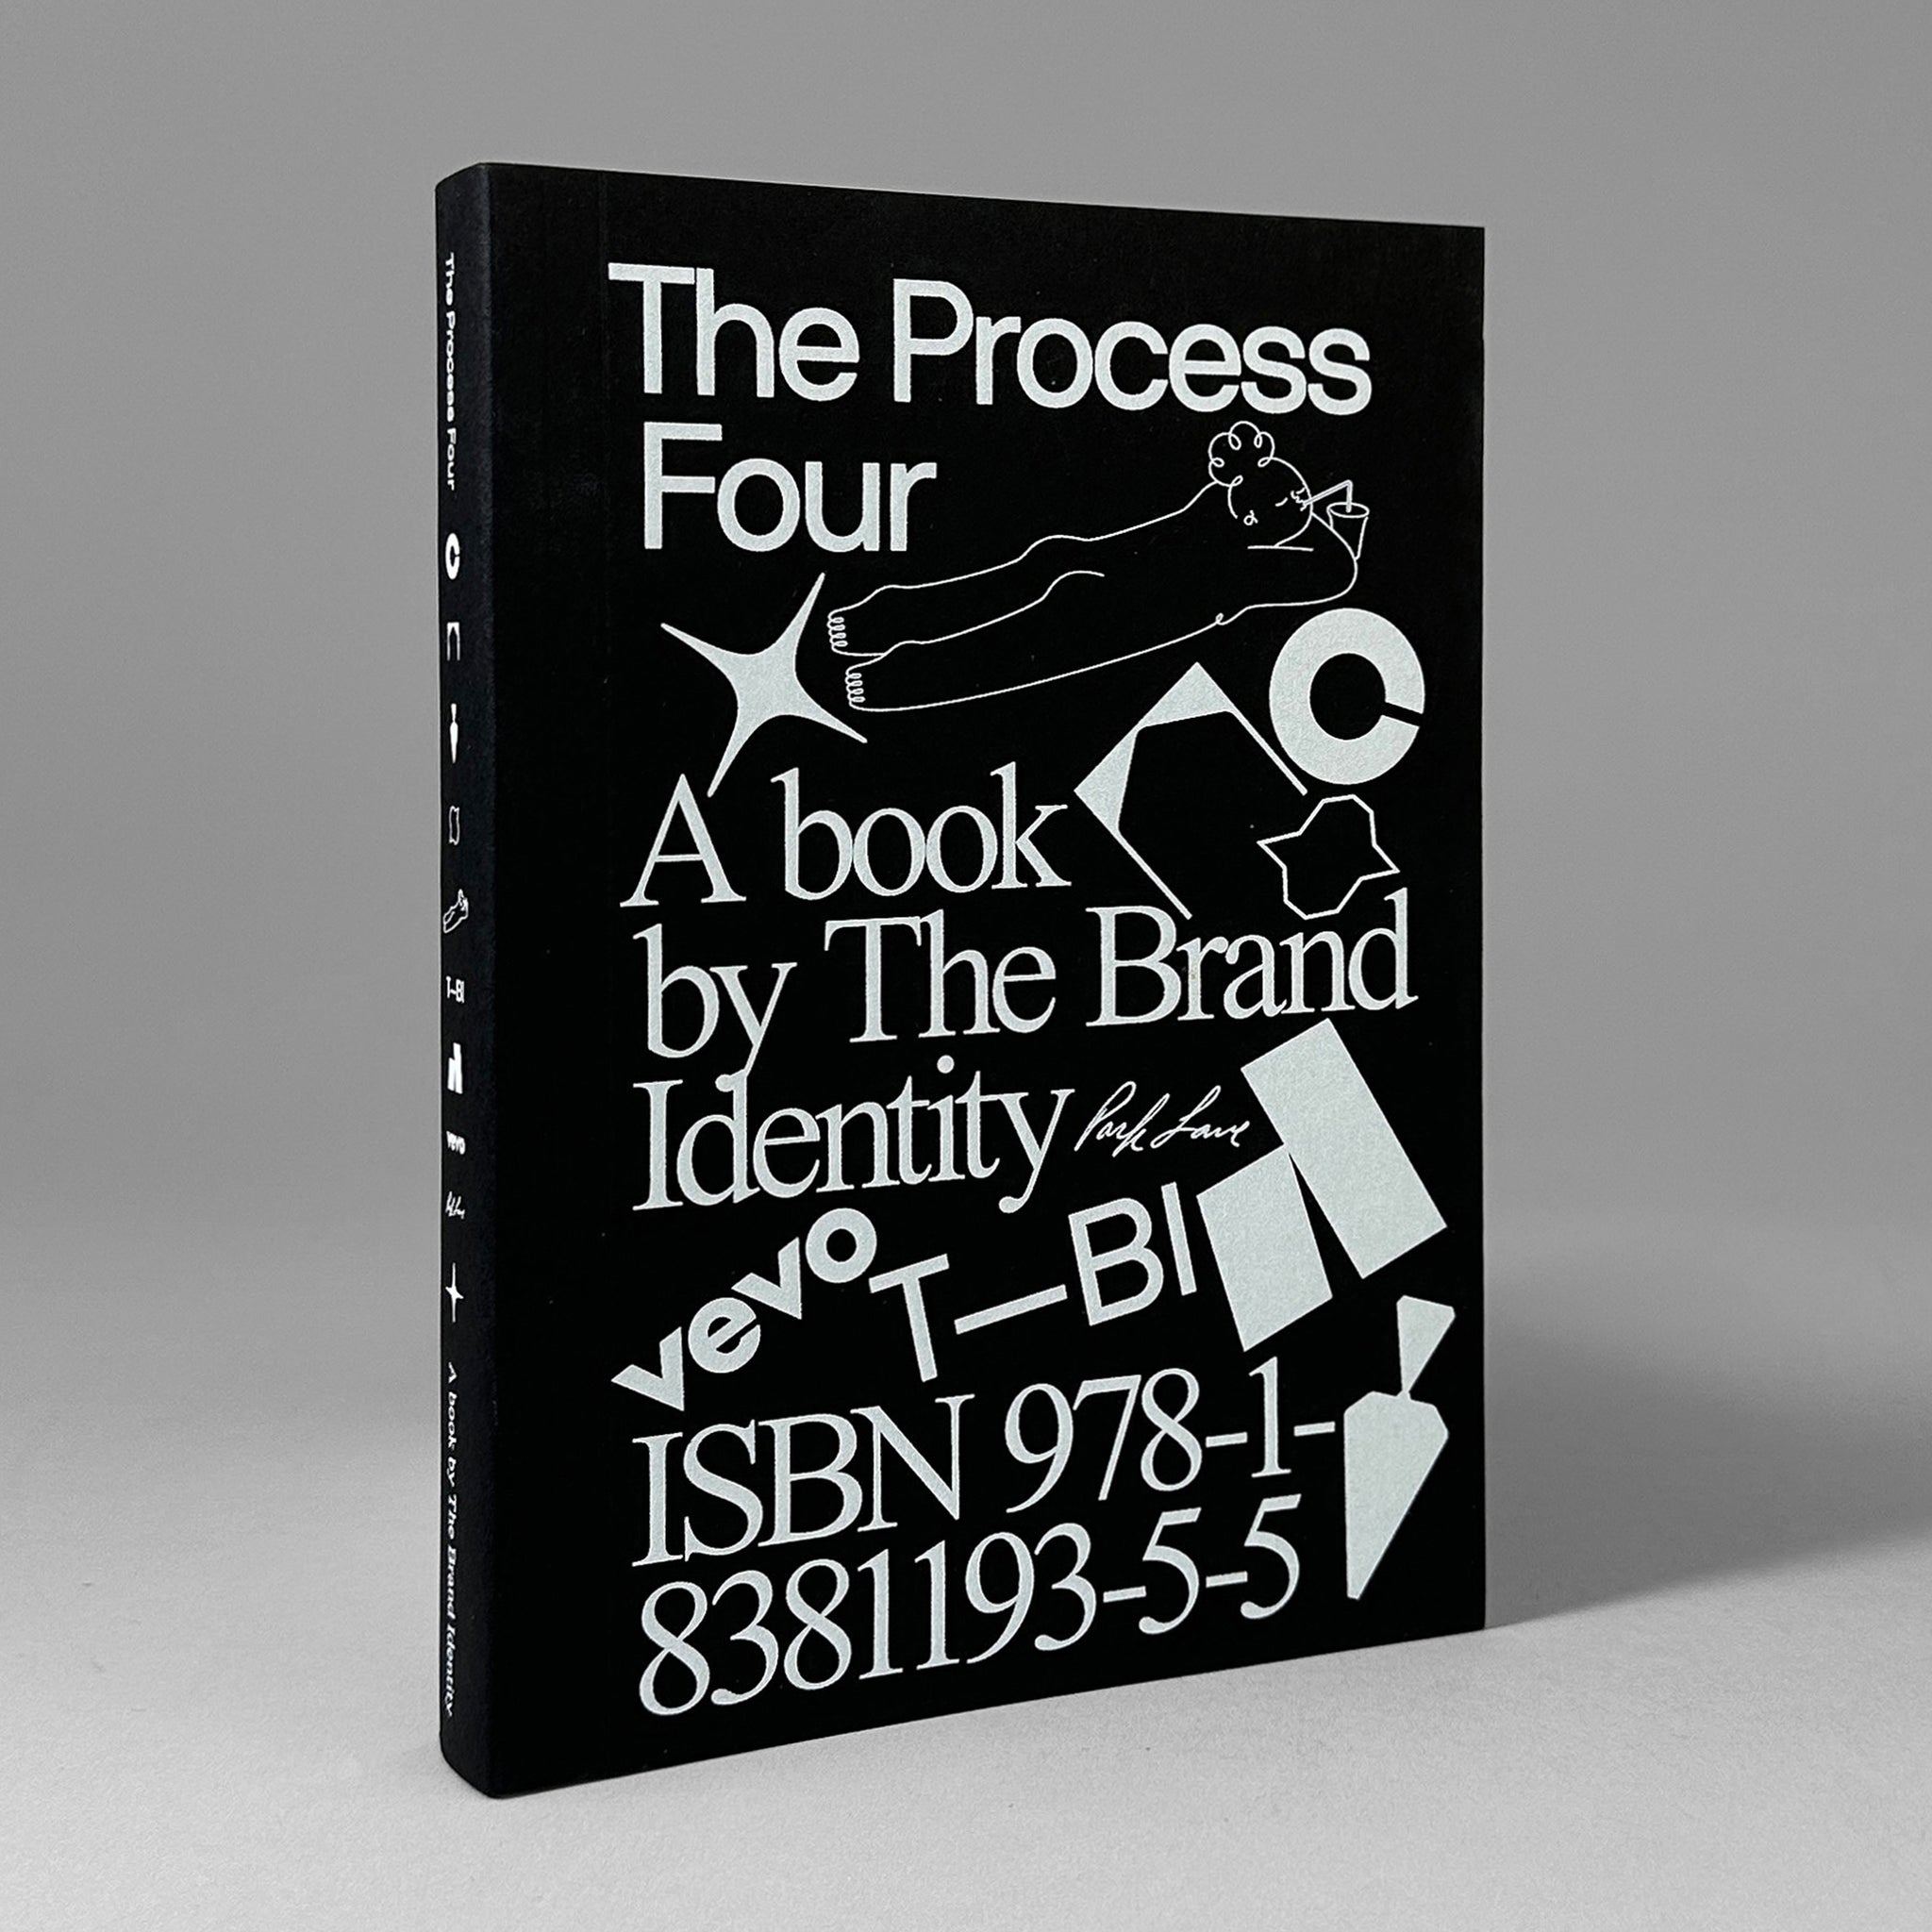 The Process Four (from The Brand Identity)